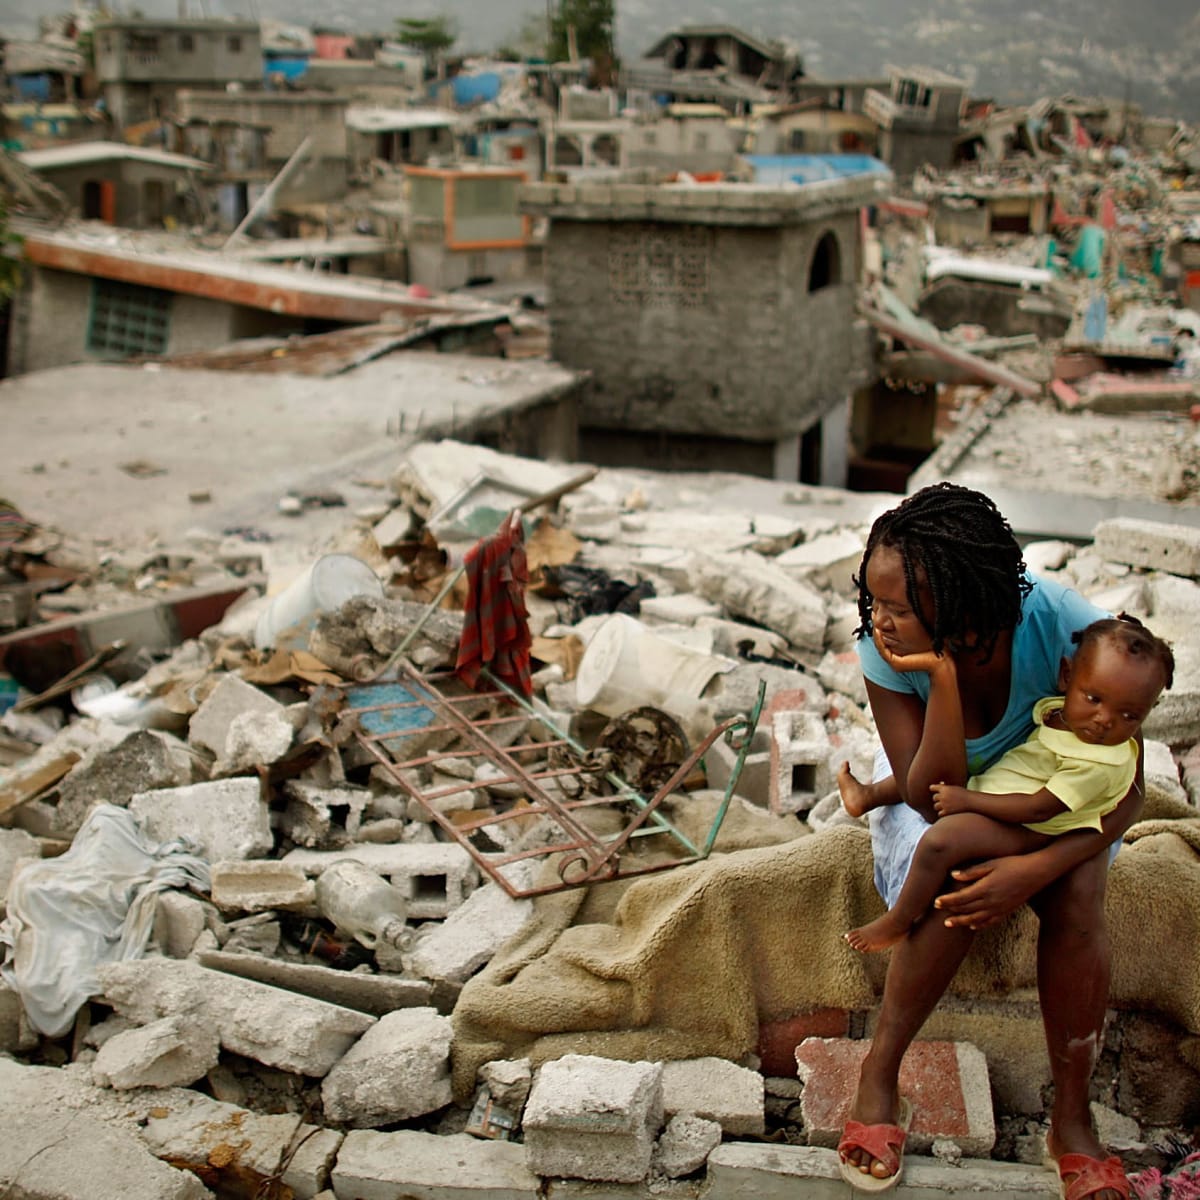 A Haitian resident during the 2010 earthquake. Photo: Chip Somodevilla